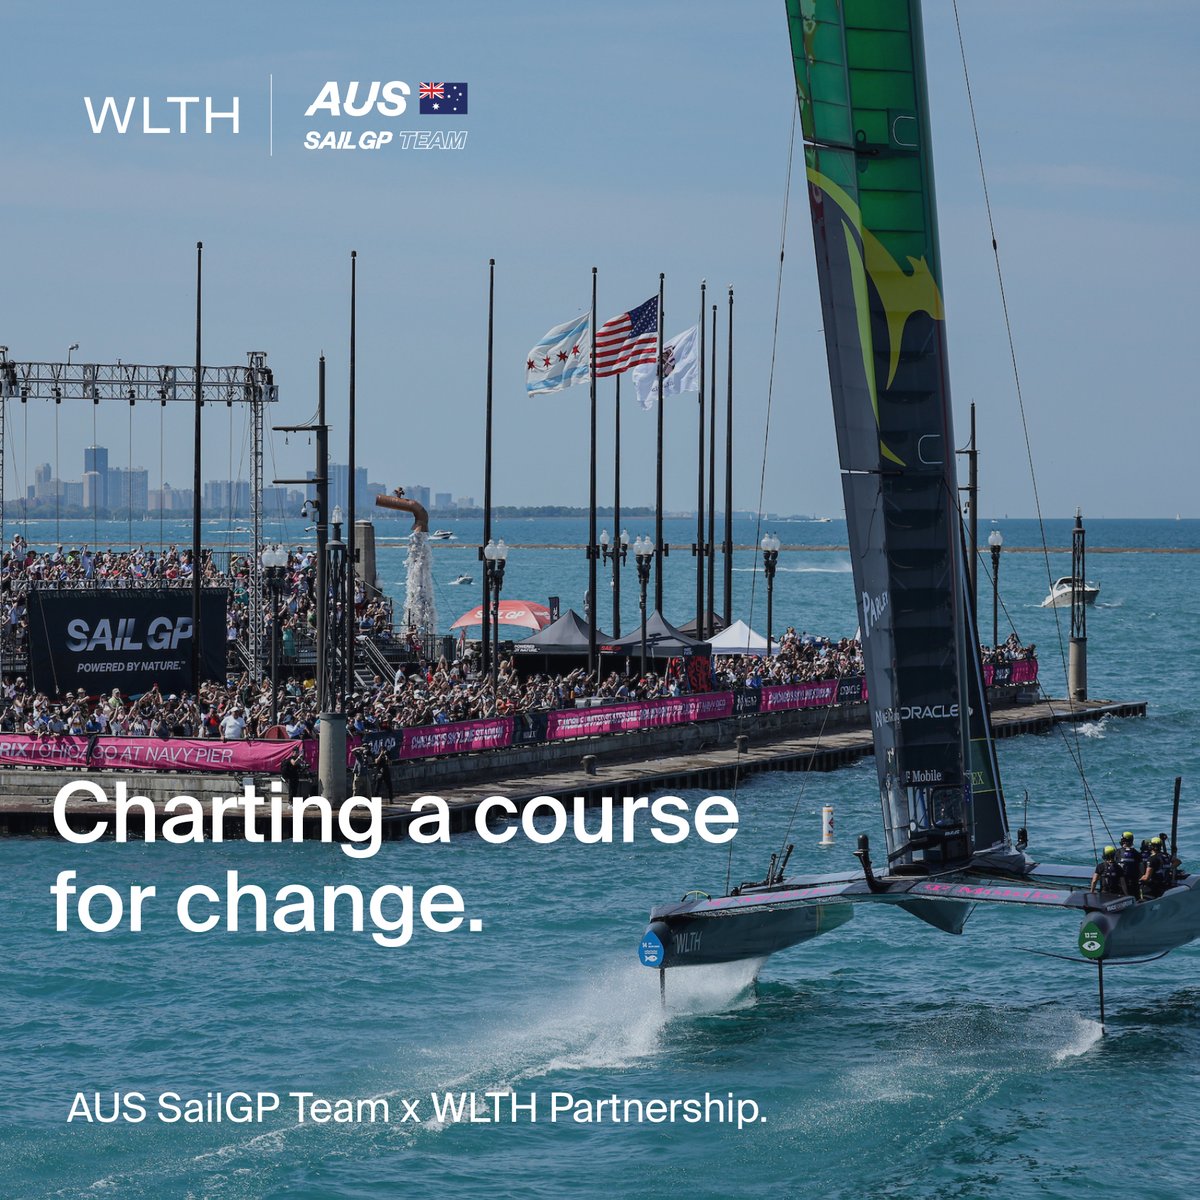 Change for future generations before it's too late. WLTH partners with Parley for the Oceans and the Australian SailGP team to conduct beach and coastline cleanups around the country.

#marinepollution #sailgpaus #loansfortheoceans